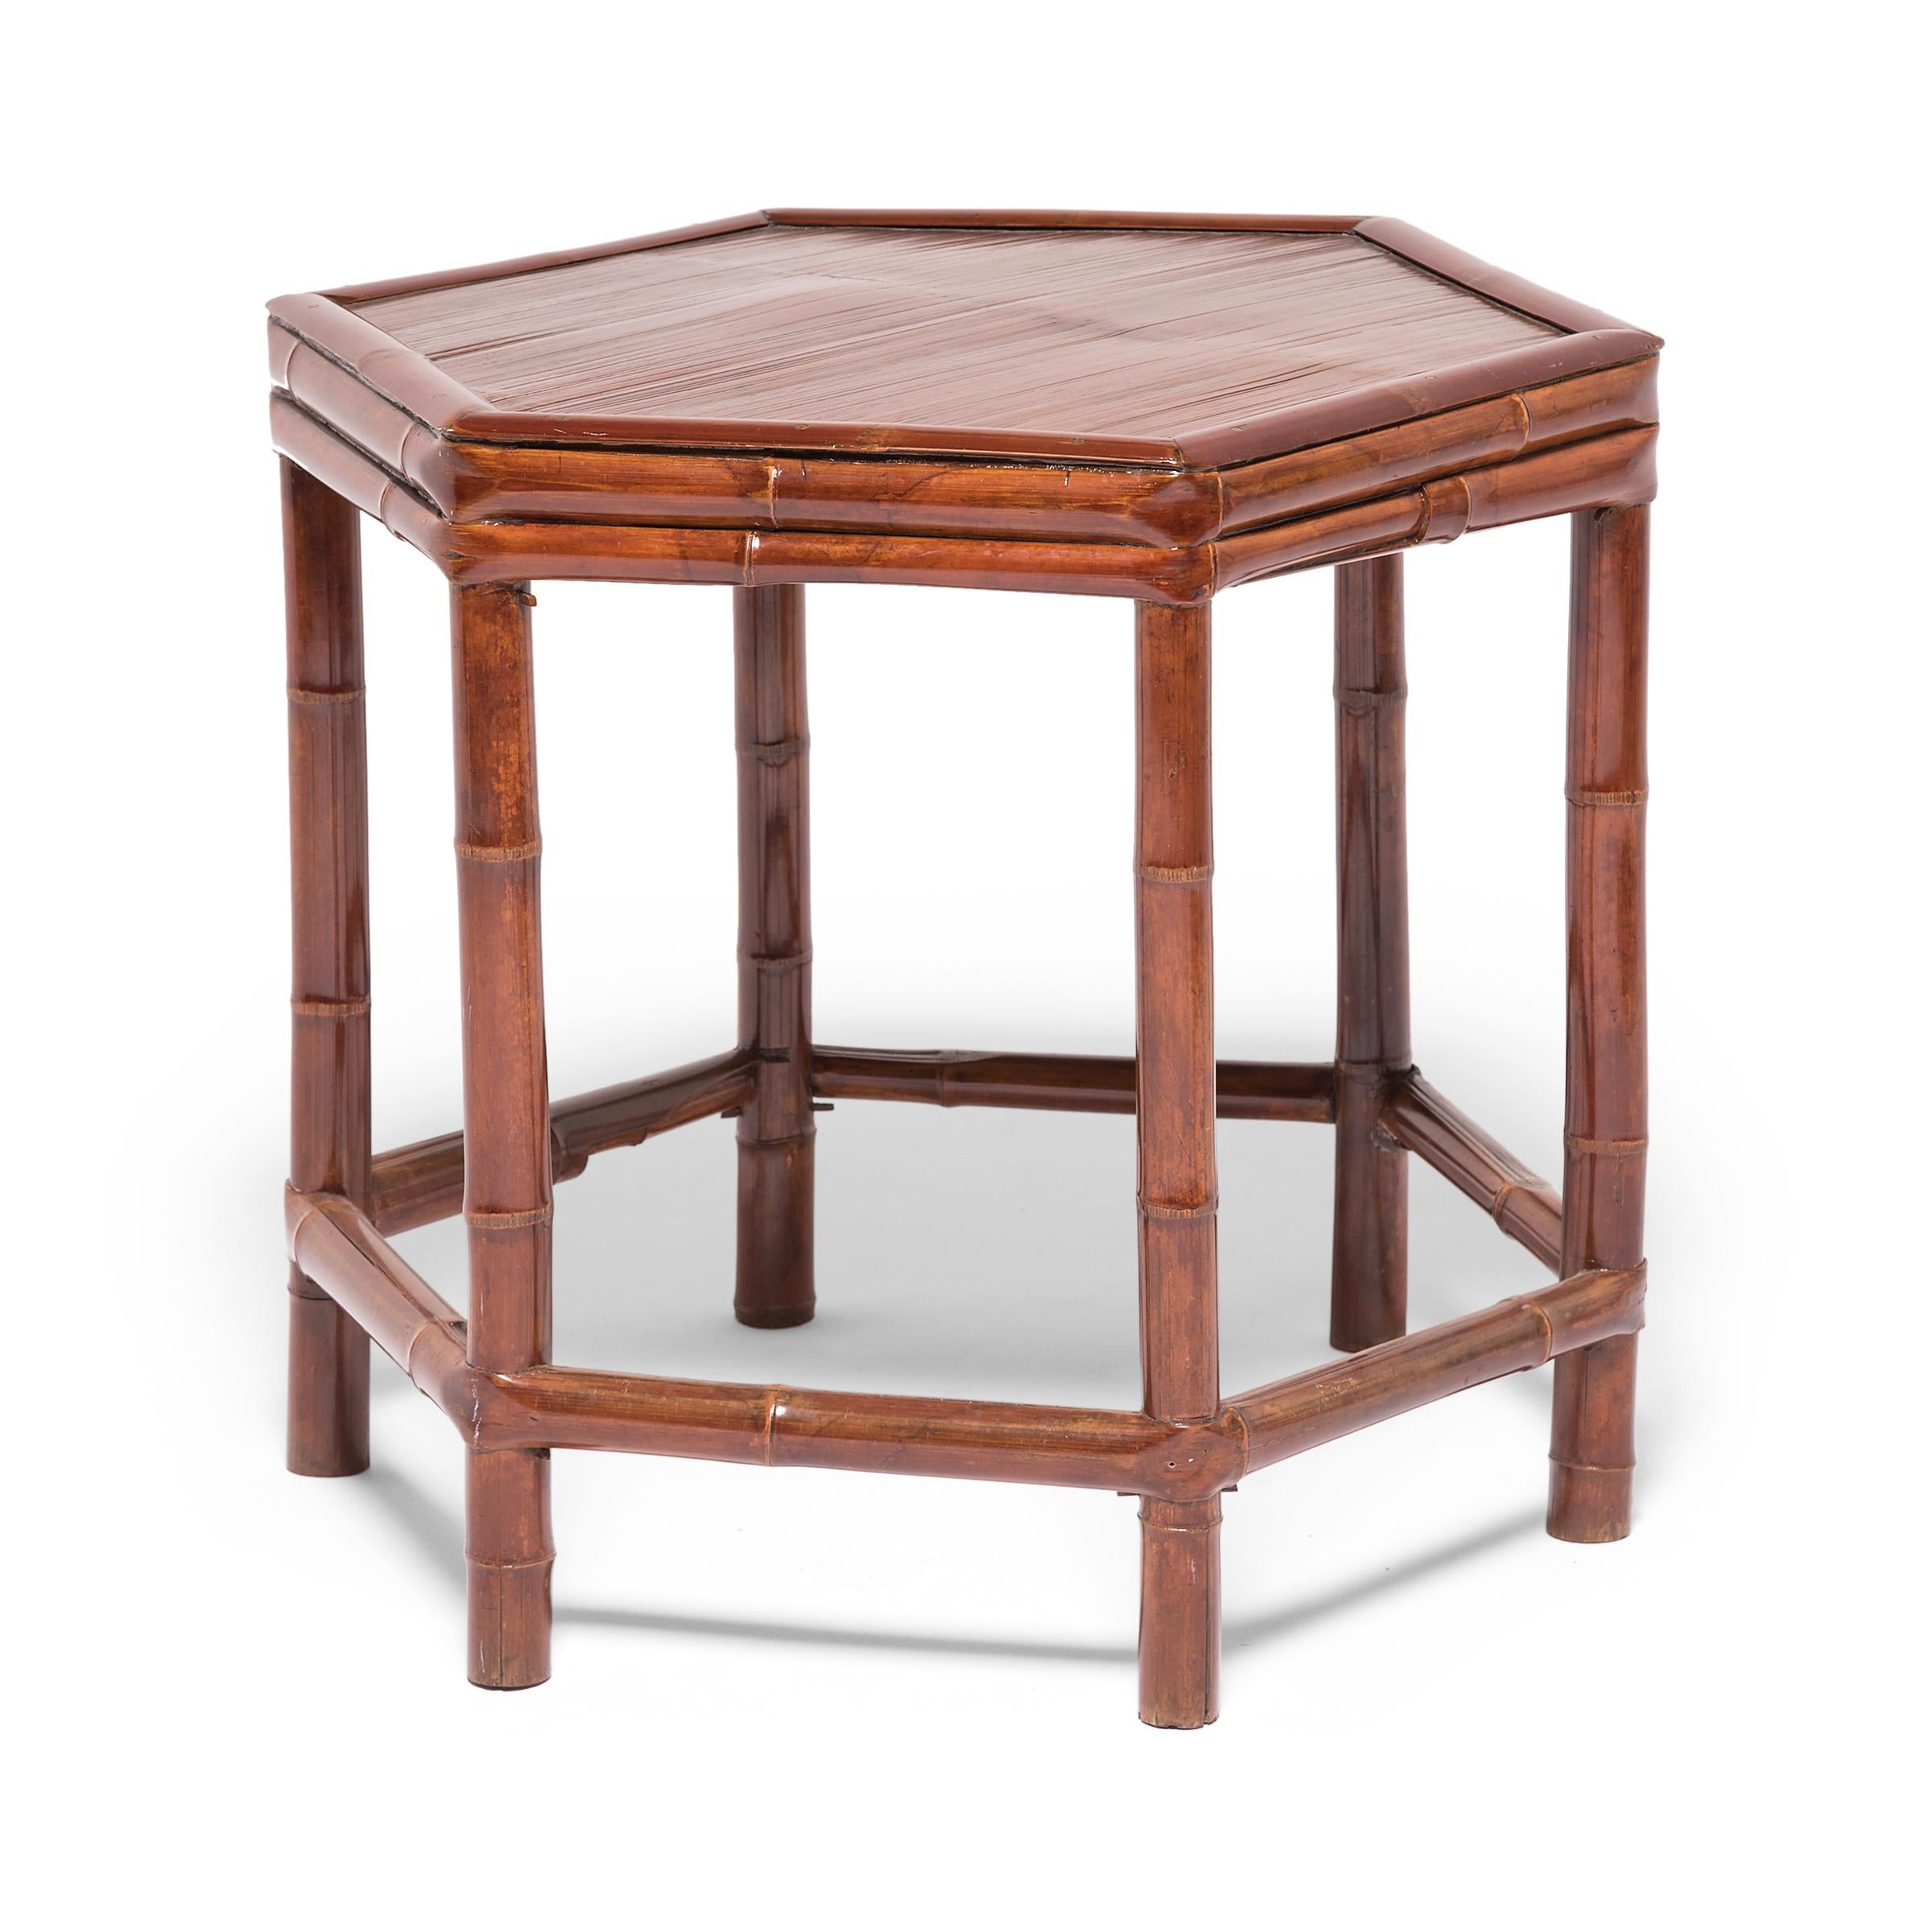 The six-sided shape of this early 20th-century table from southern China is unusual for Qing-dynasty furniture. Referencing the simpler designs popular in previous eras, this side table was constructed with a frame of bent bamboo and a crushed